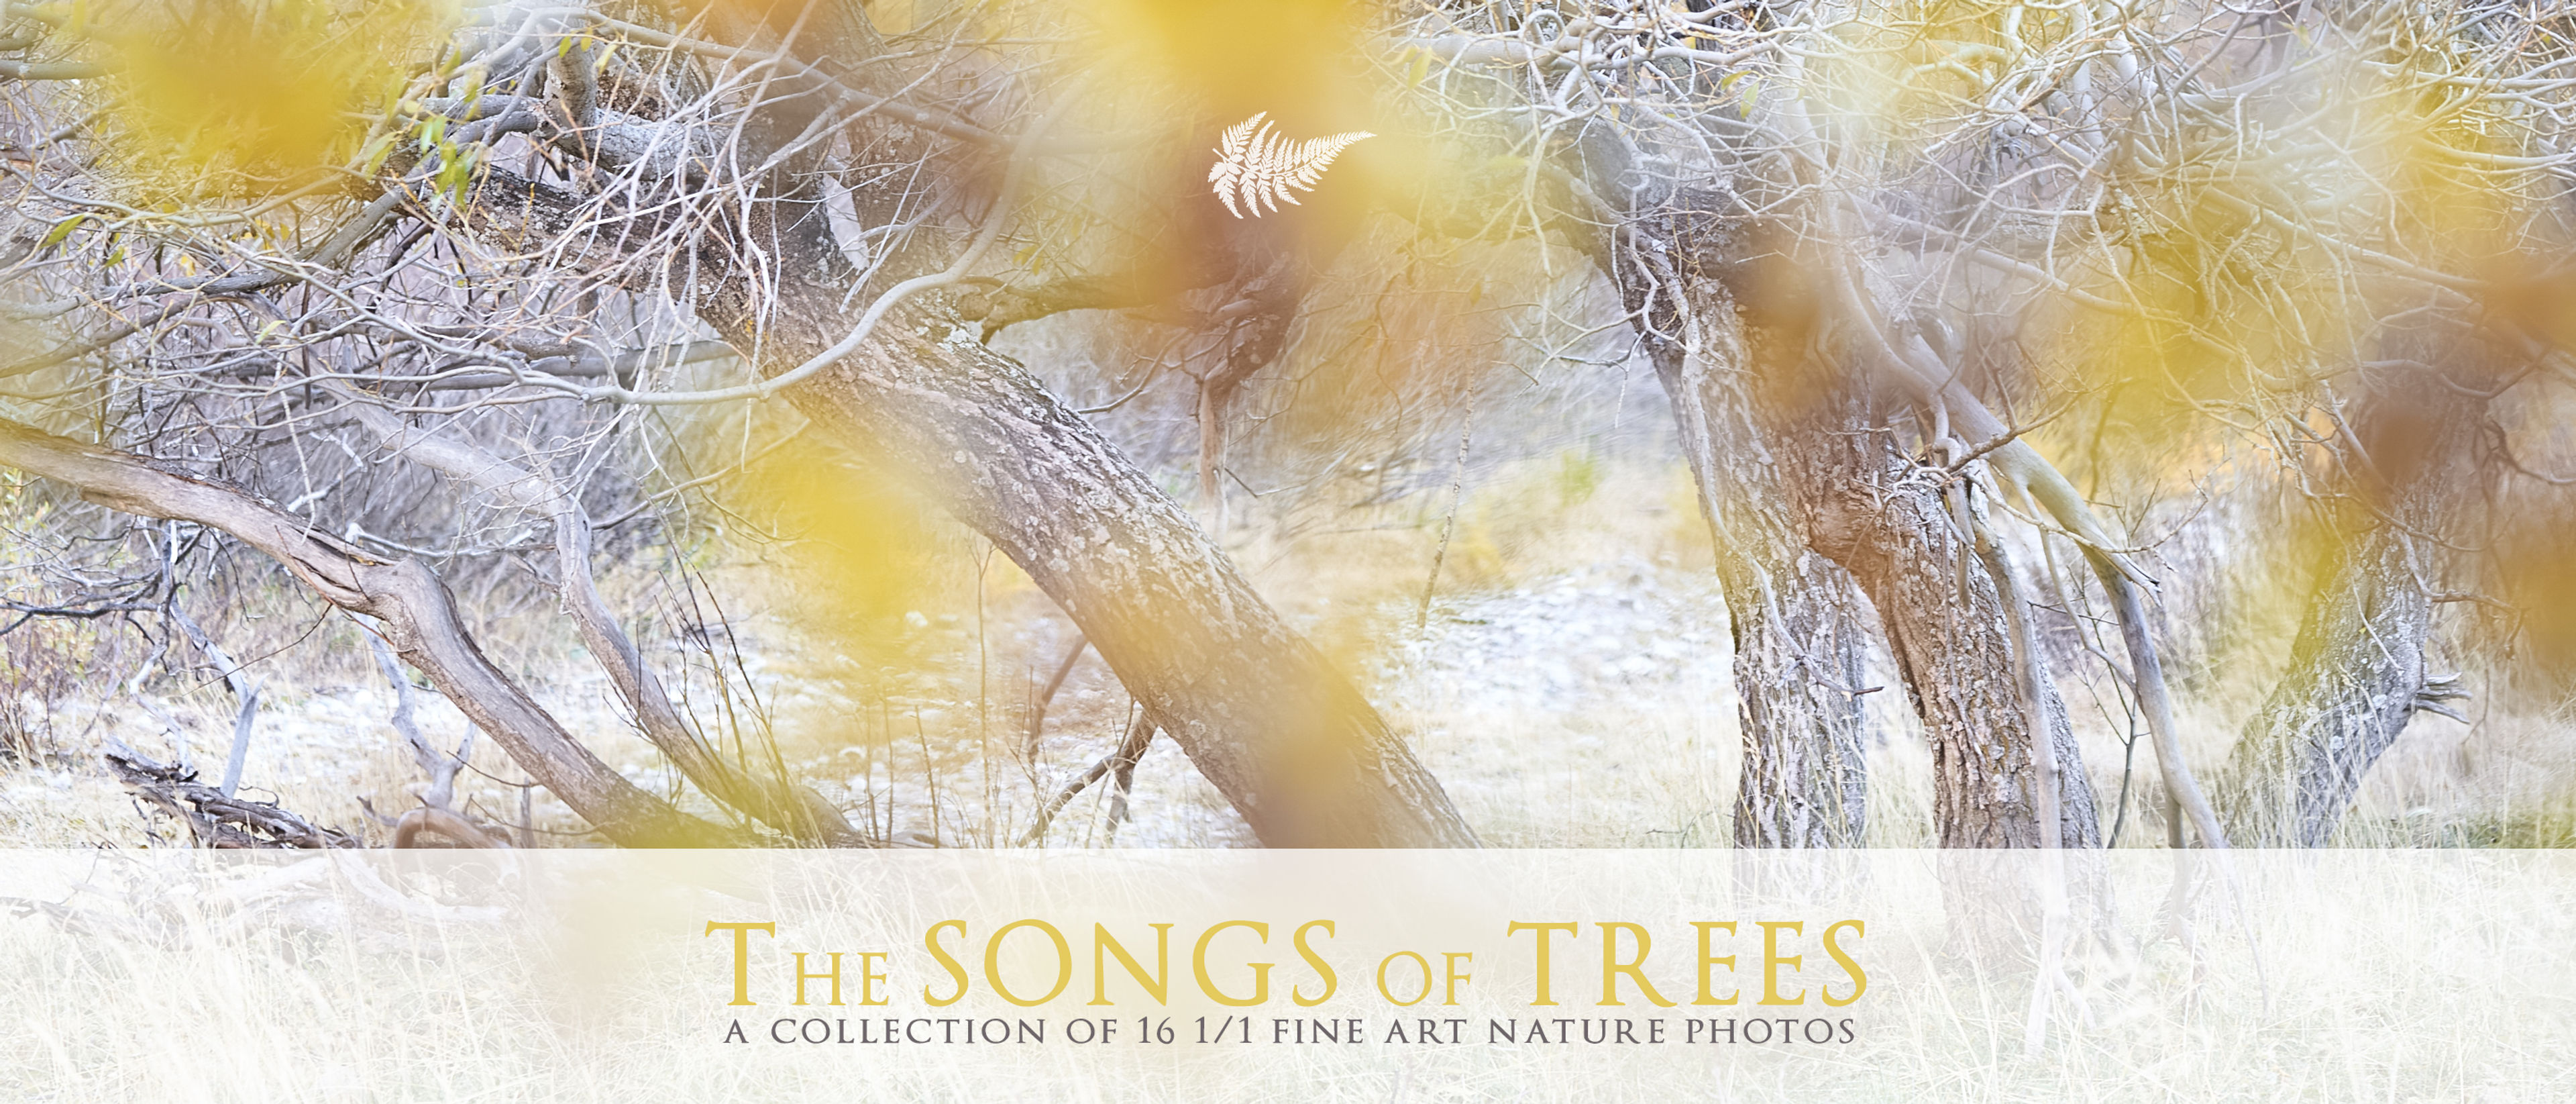 THE SONGS OF TREES by ANDREA CELLI Collection Header Image